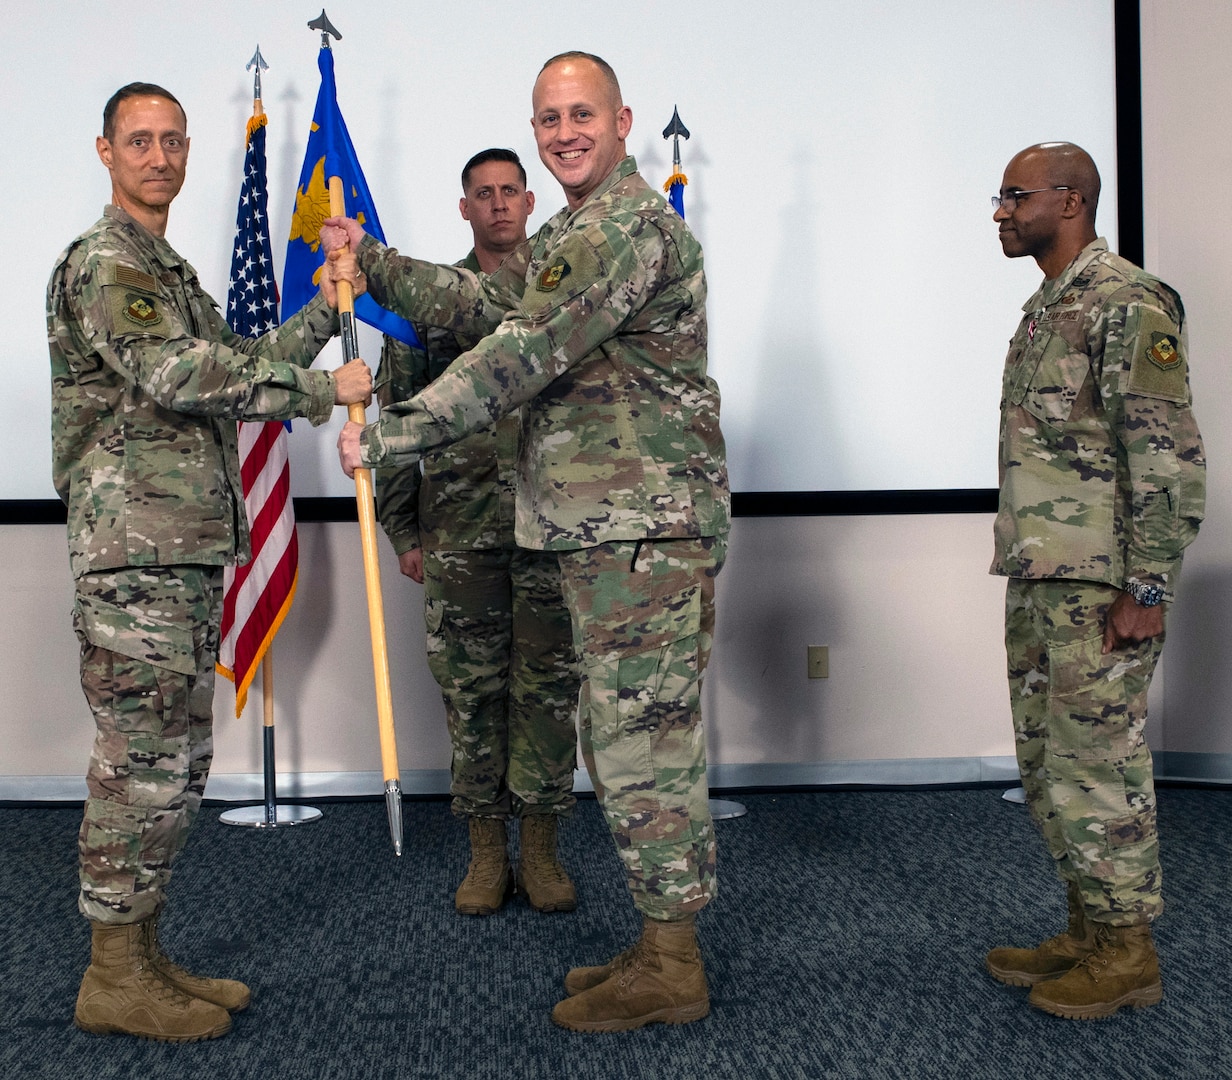 U.S. Air Force Maj. Karl Wiest accepts the guidon from U.S. Air Force Lt. Col. Greg Hignite, Air Force Public Affairs Agency commander, during a change of command ceremony.